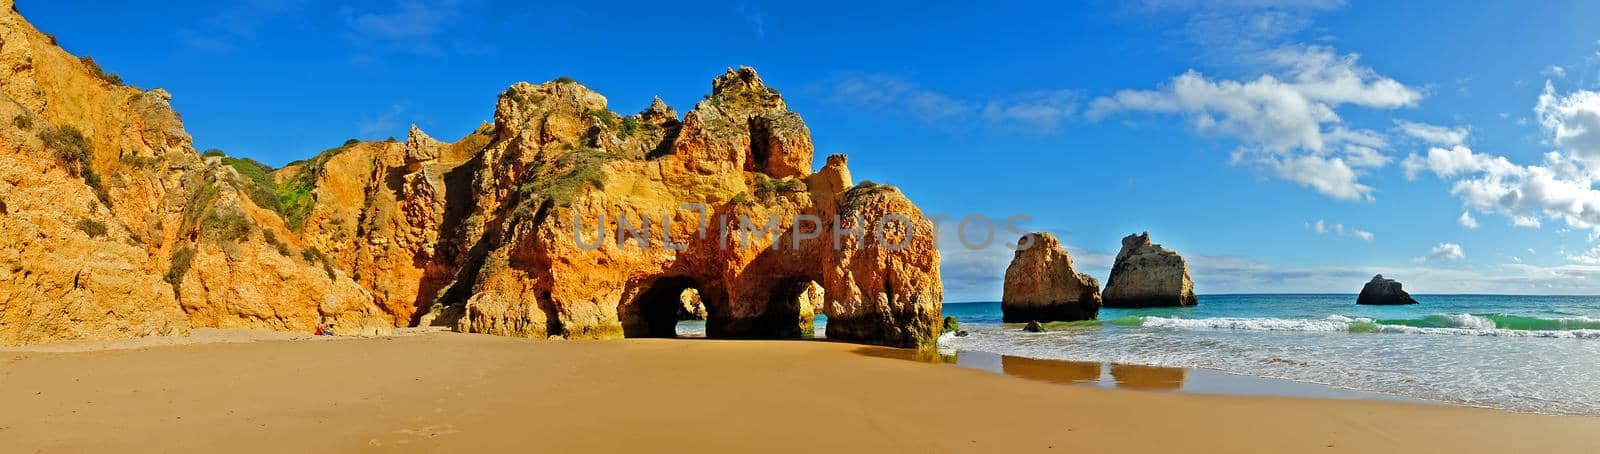 Panorama from natural rocks at Praia Tres Irmaos in Alvor in the Algarve Portugal by devy